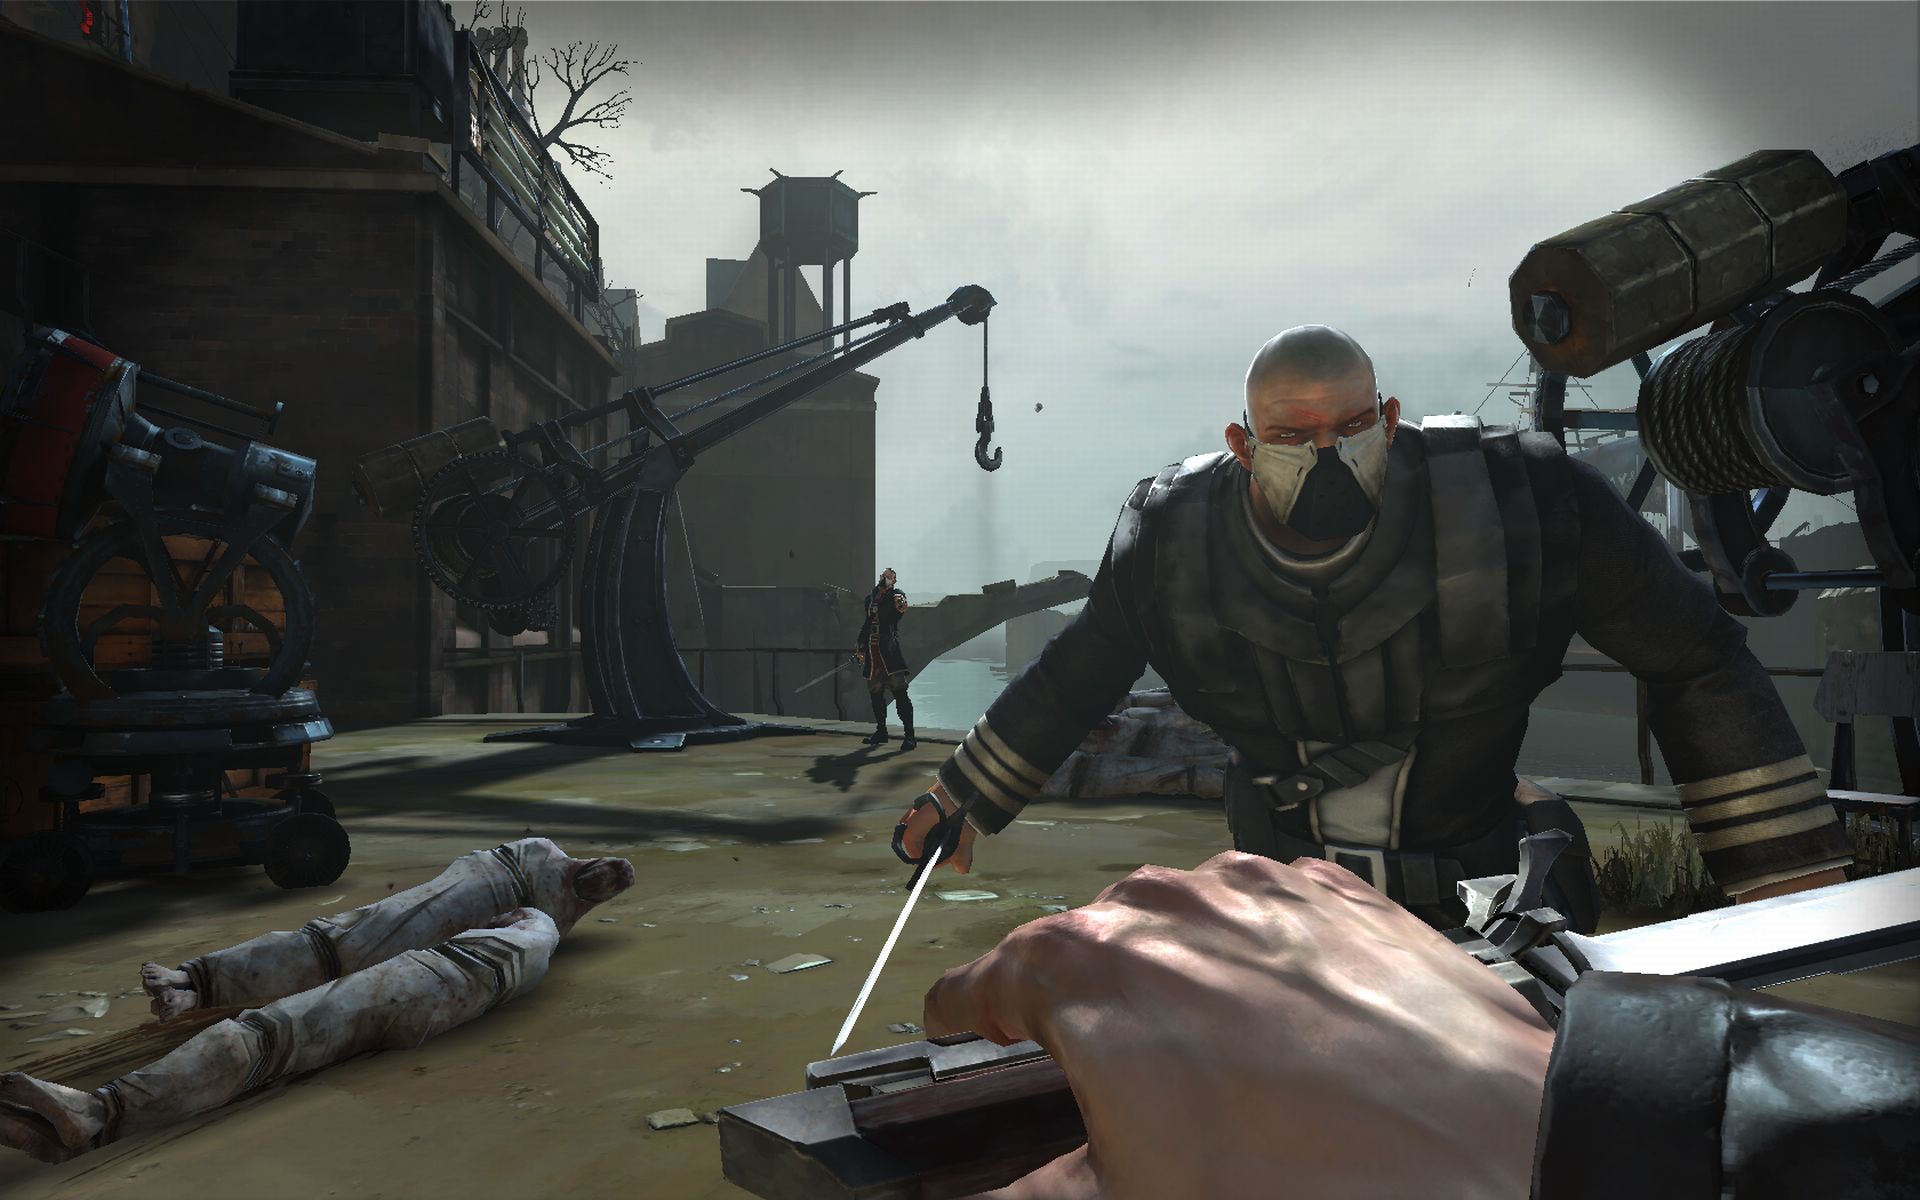 Knife Fight At The Docks - Dishonored Wallpaper